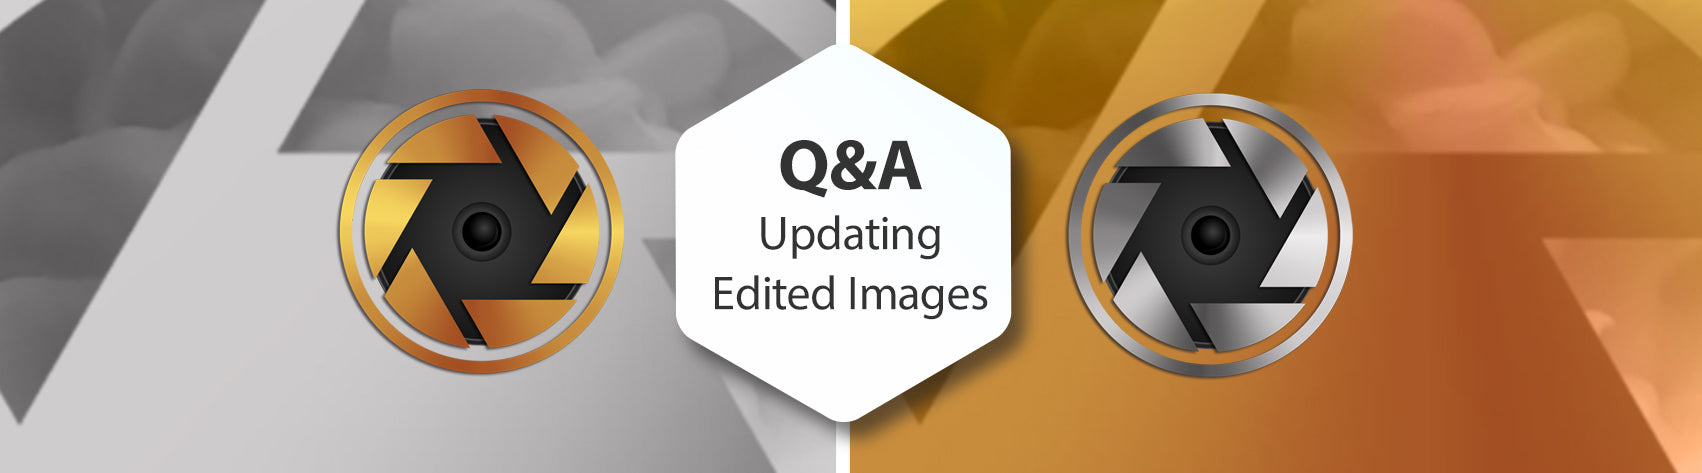 Q&A Updating Edited Images